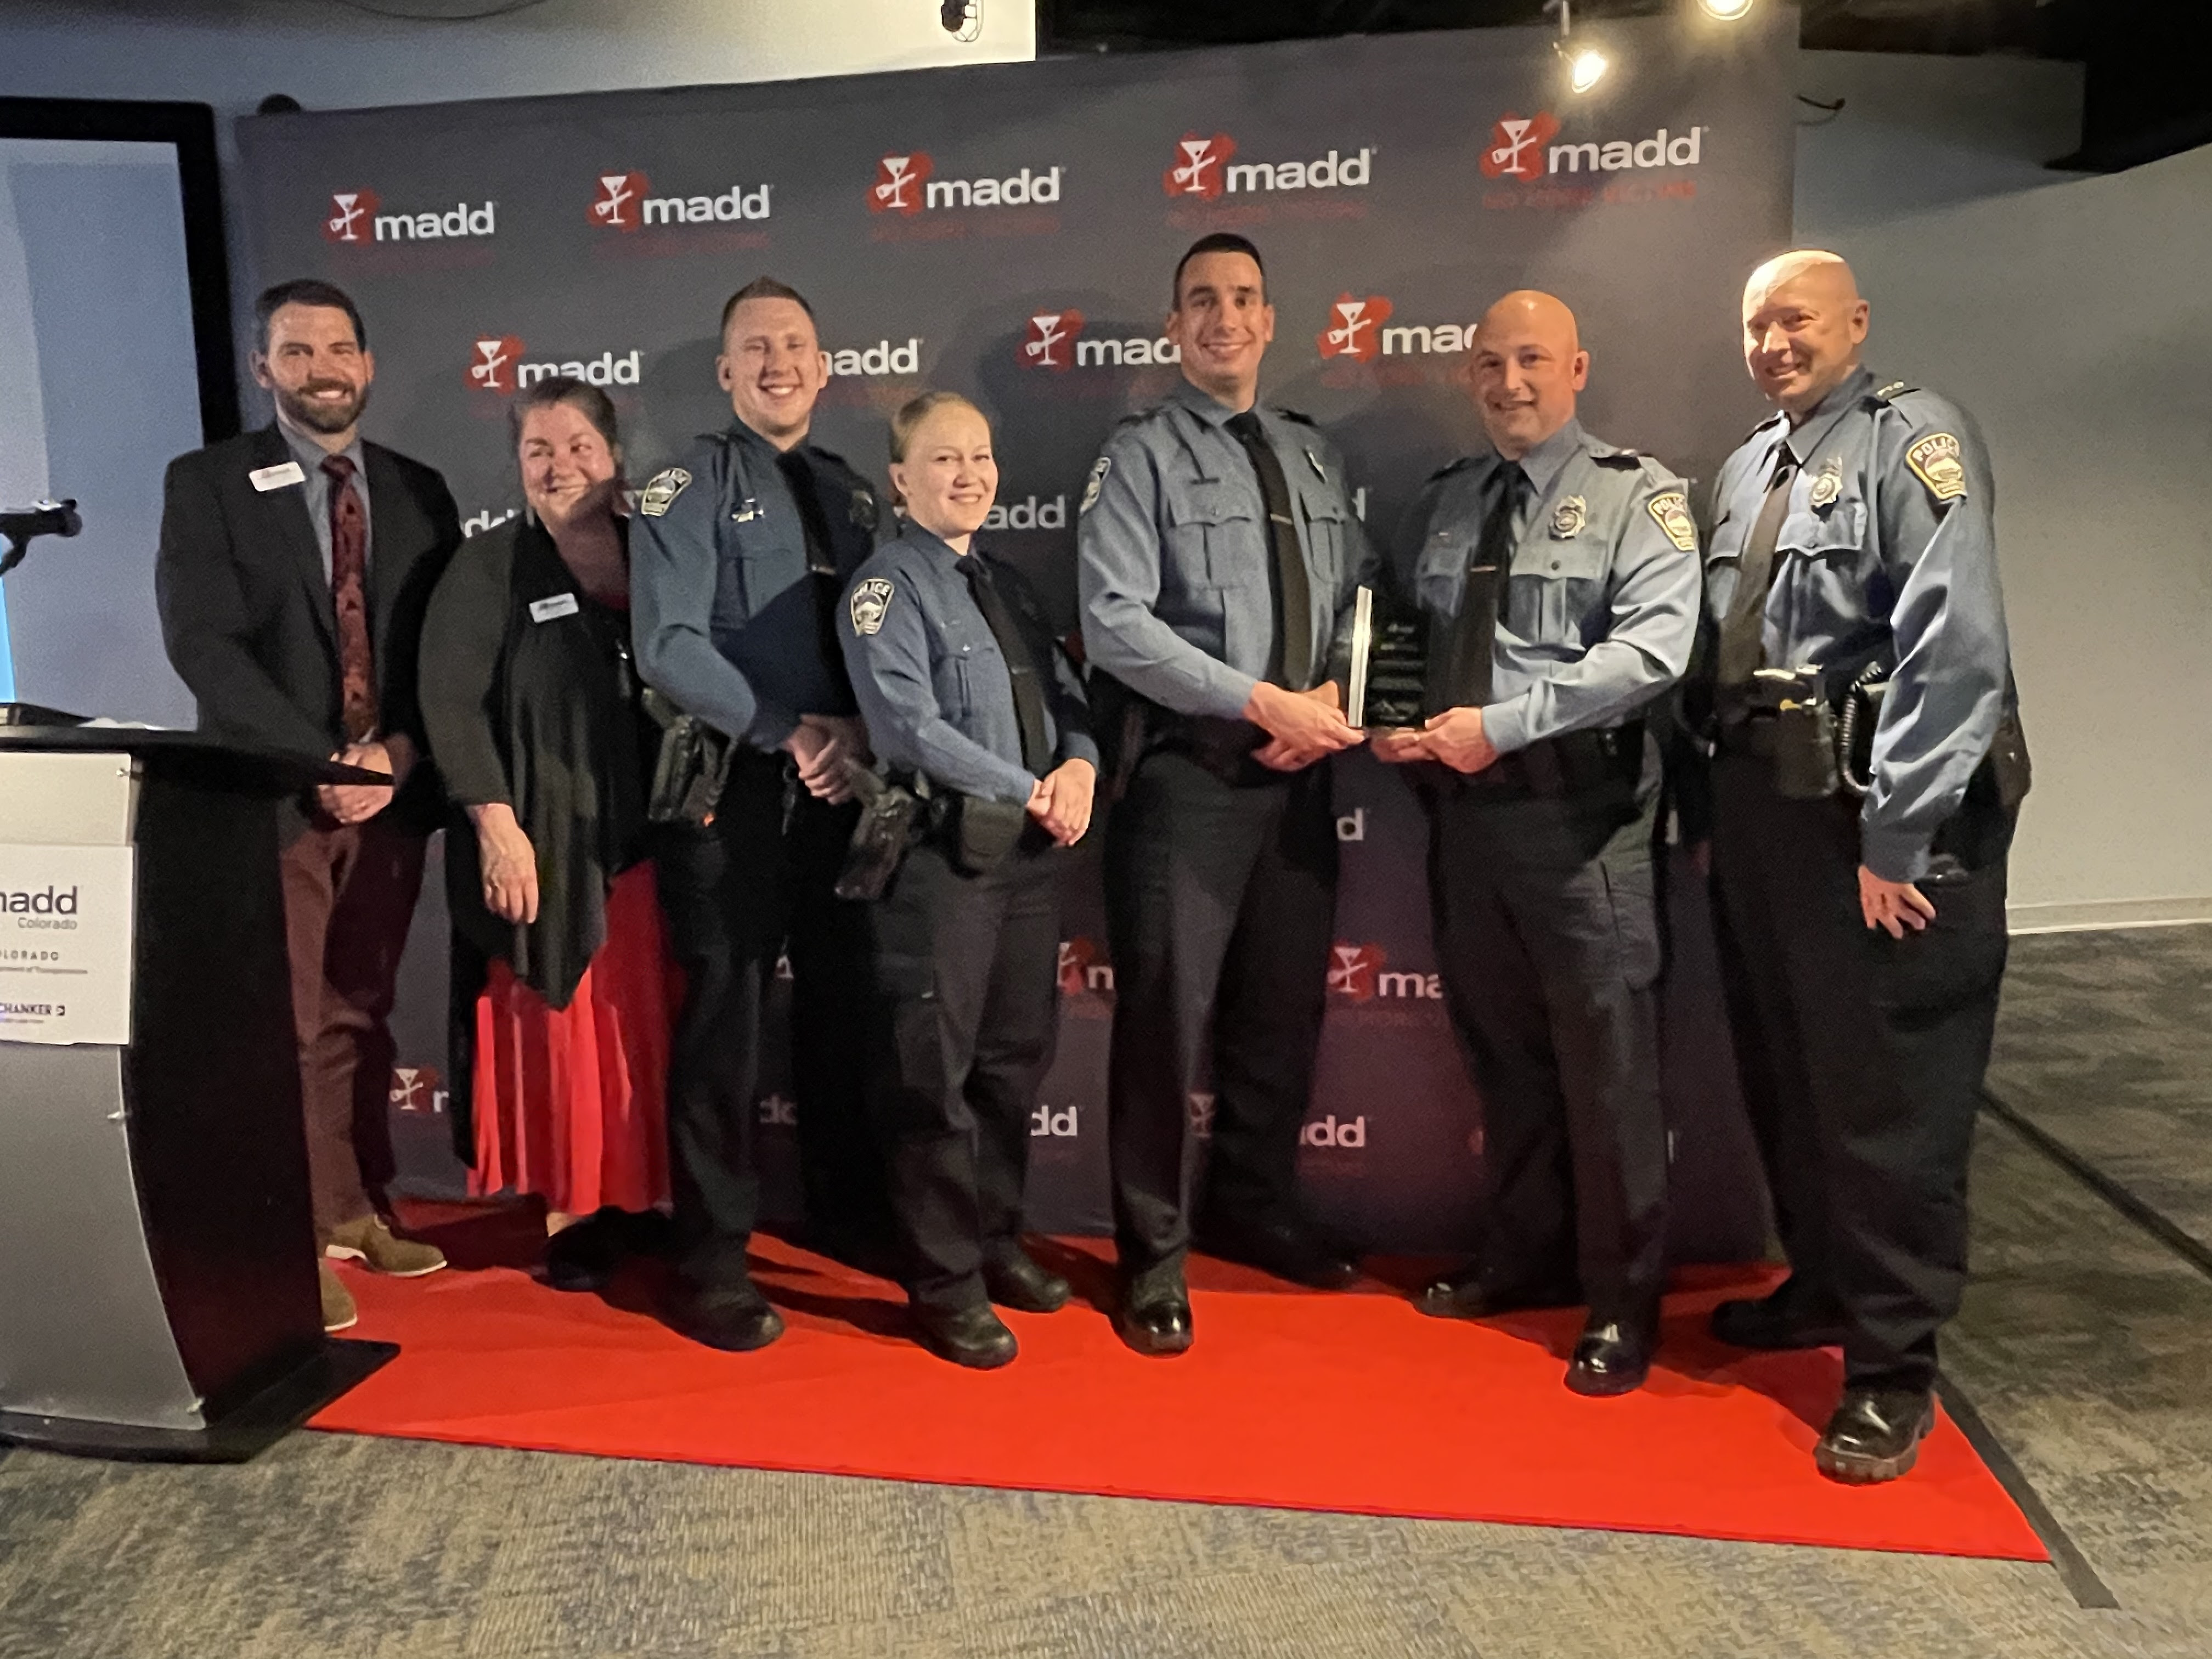 Colorado State Patrol DUI Unit (7 people) receive their award in front of red MADD podium 